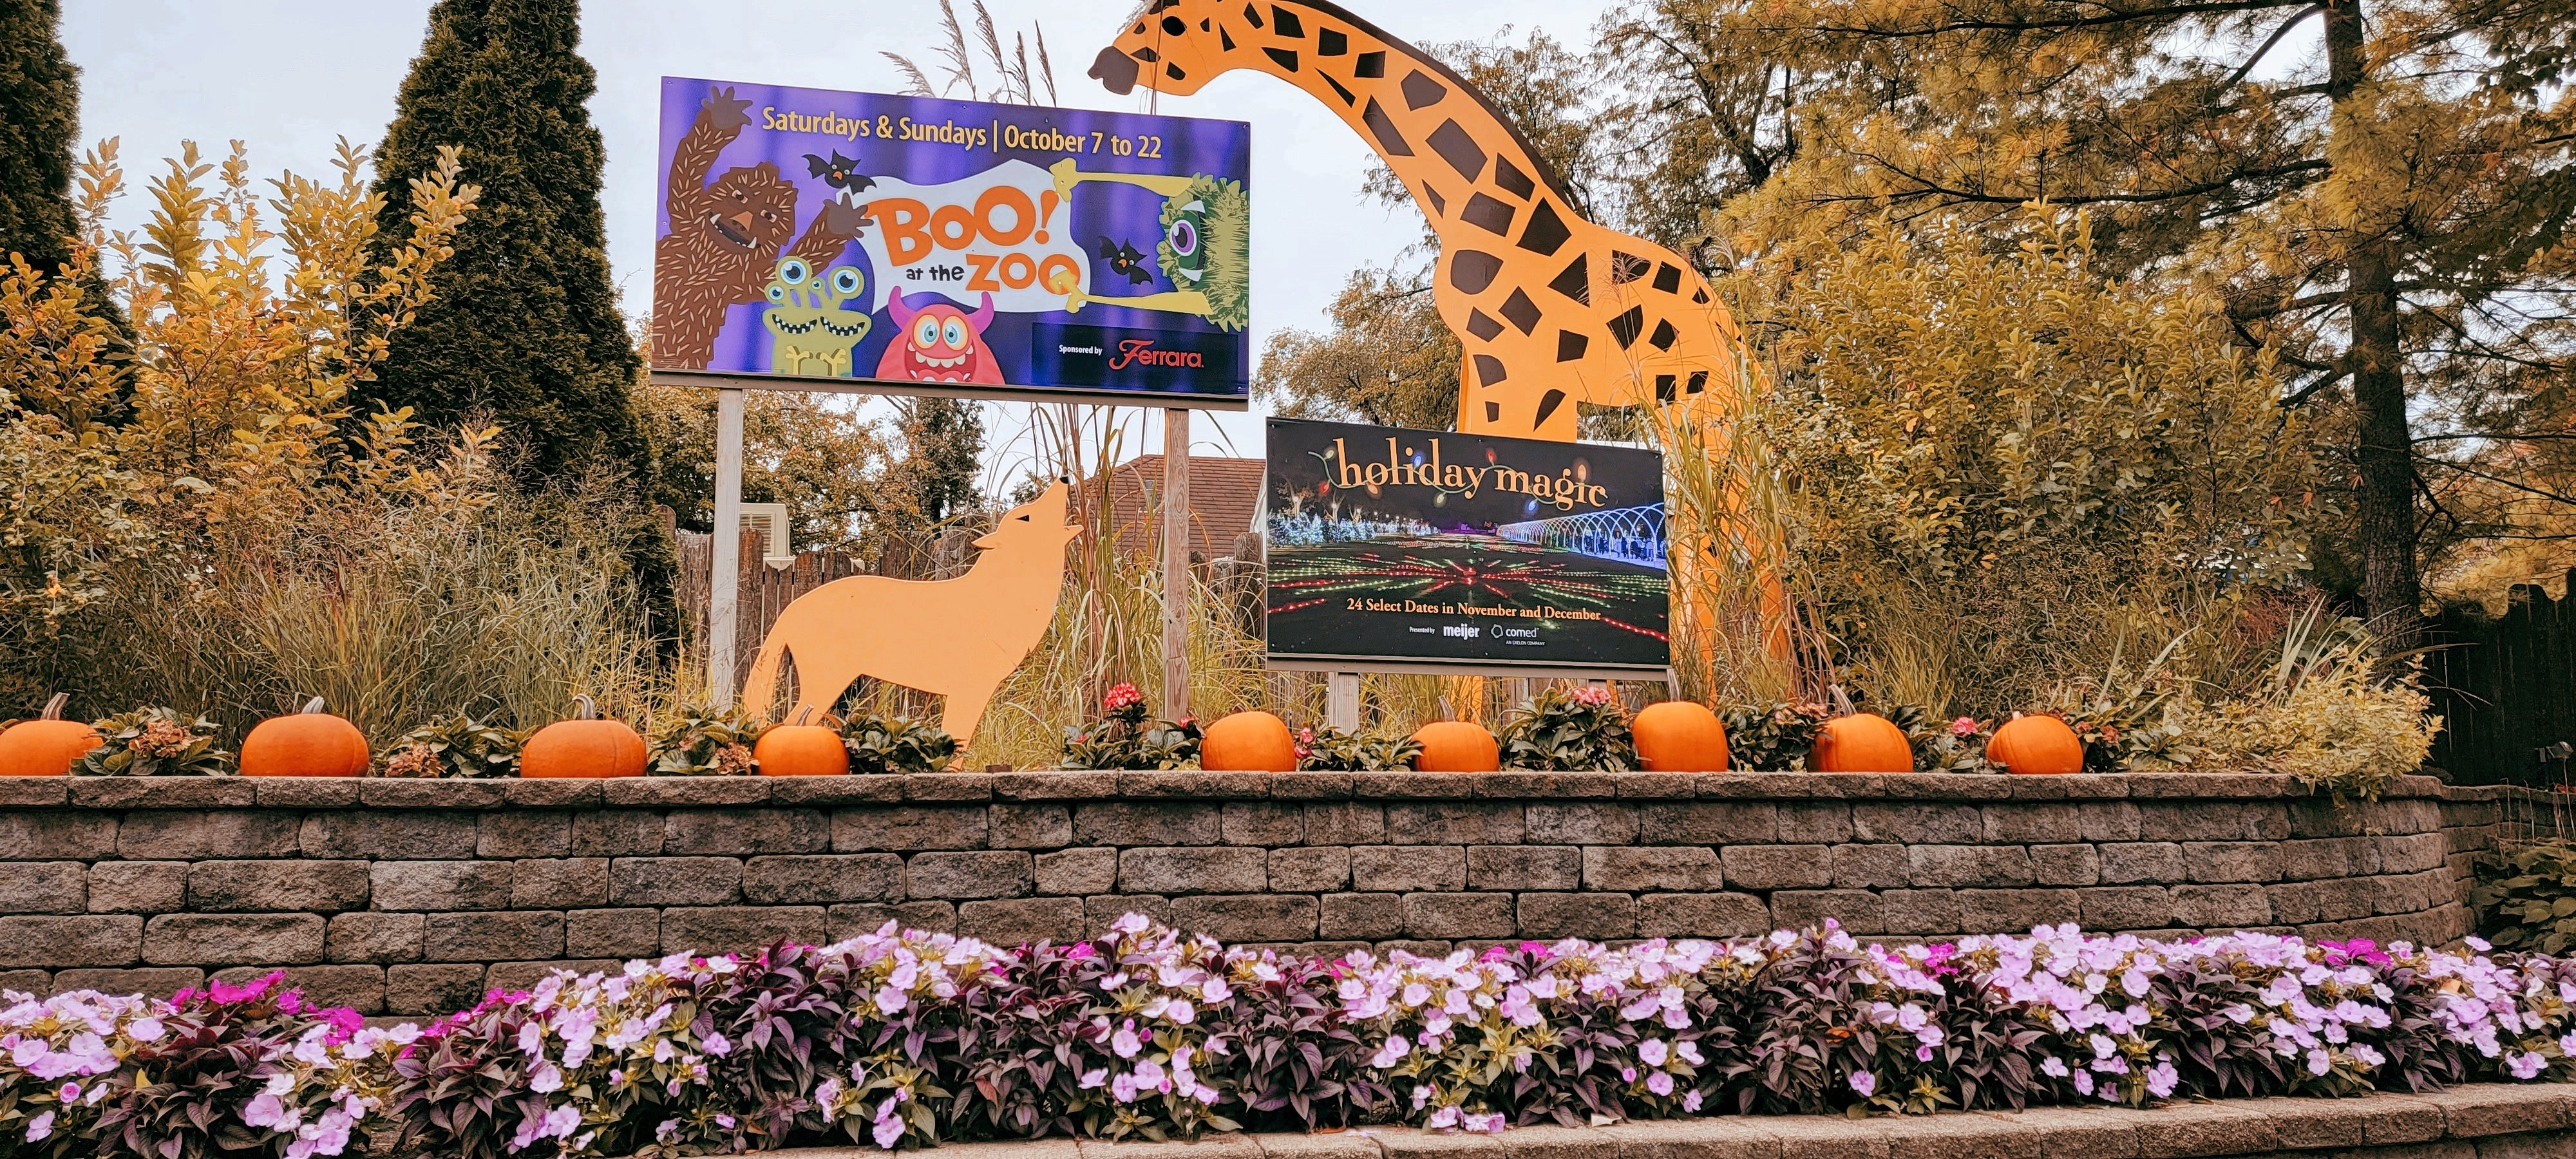 Brookfield Zoo Boo! at the Zoo: How to Plan Your Visit